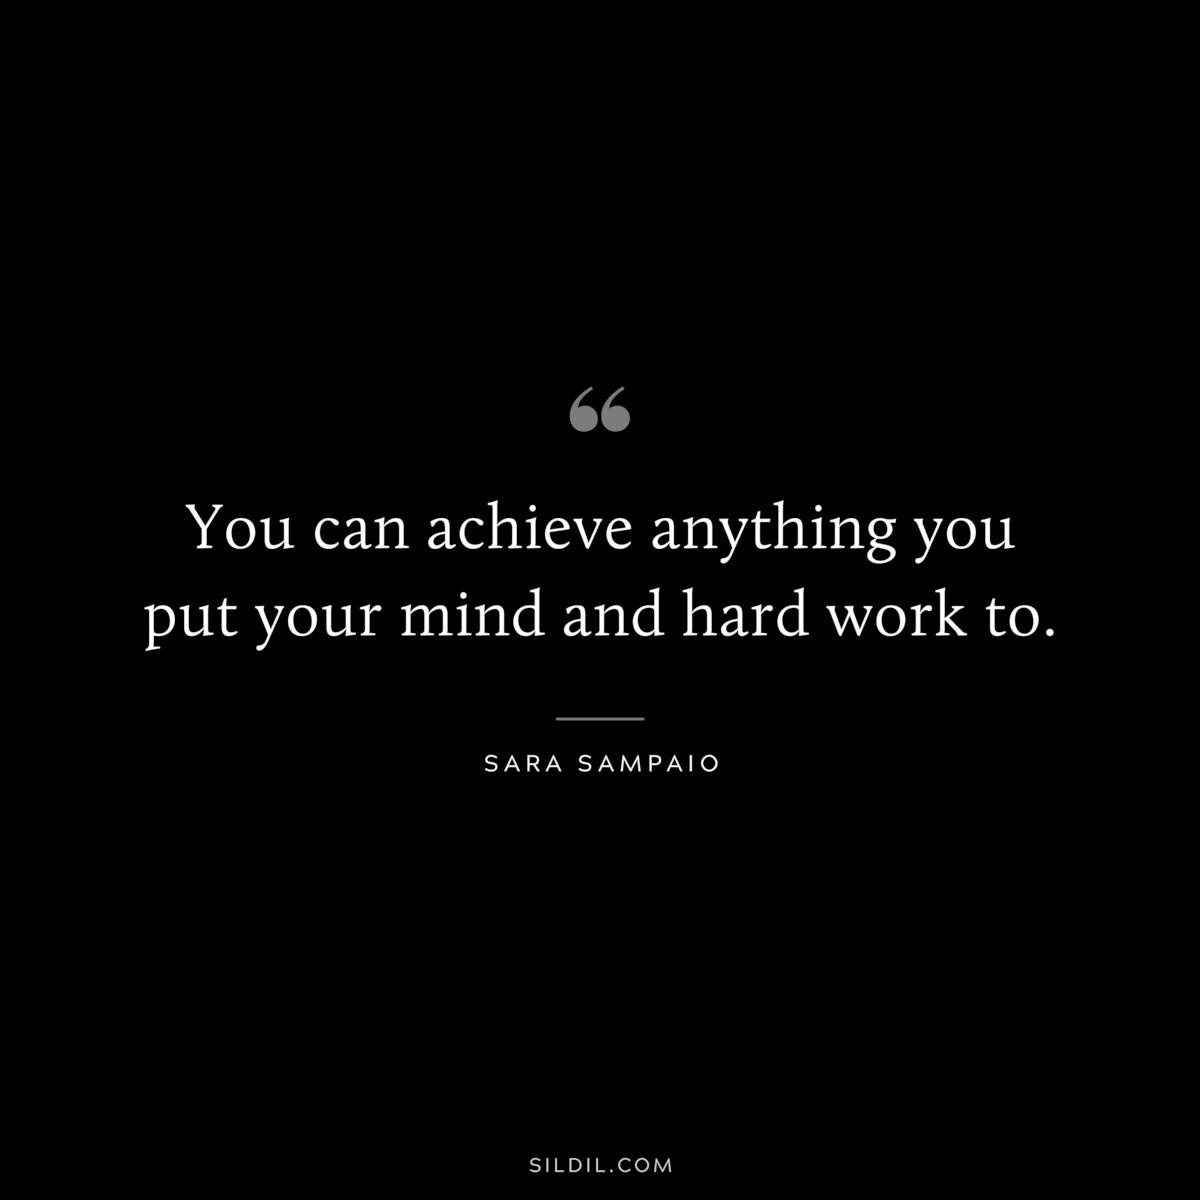 You can achieve anything you put your mind and hard work to. ― Sara Sampaio